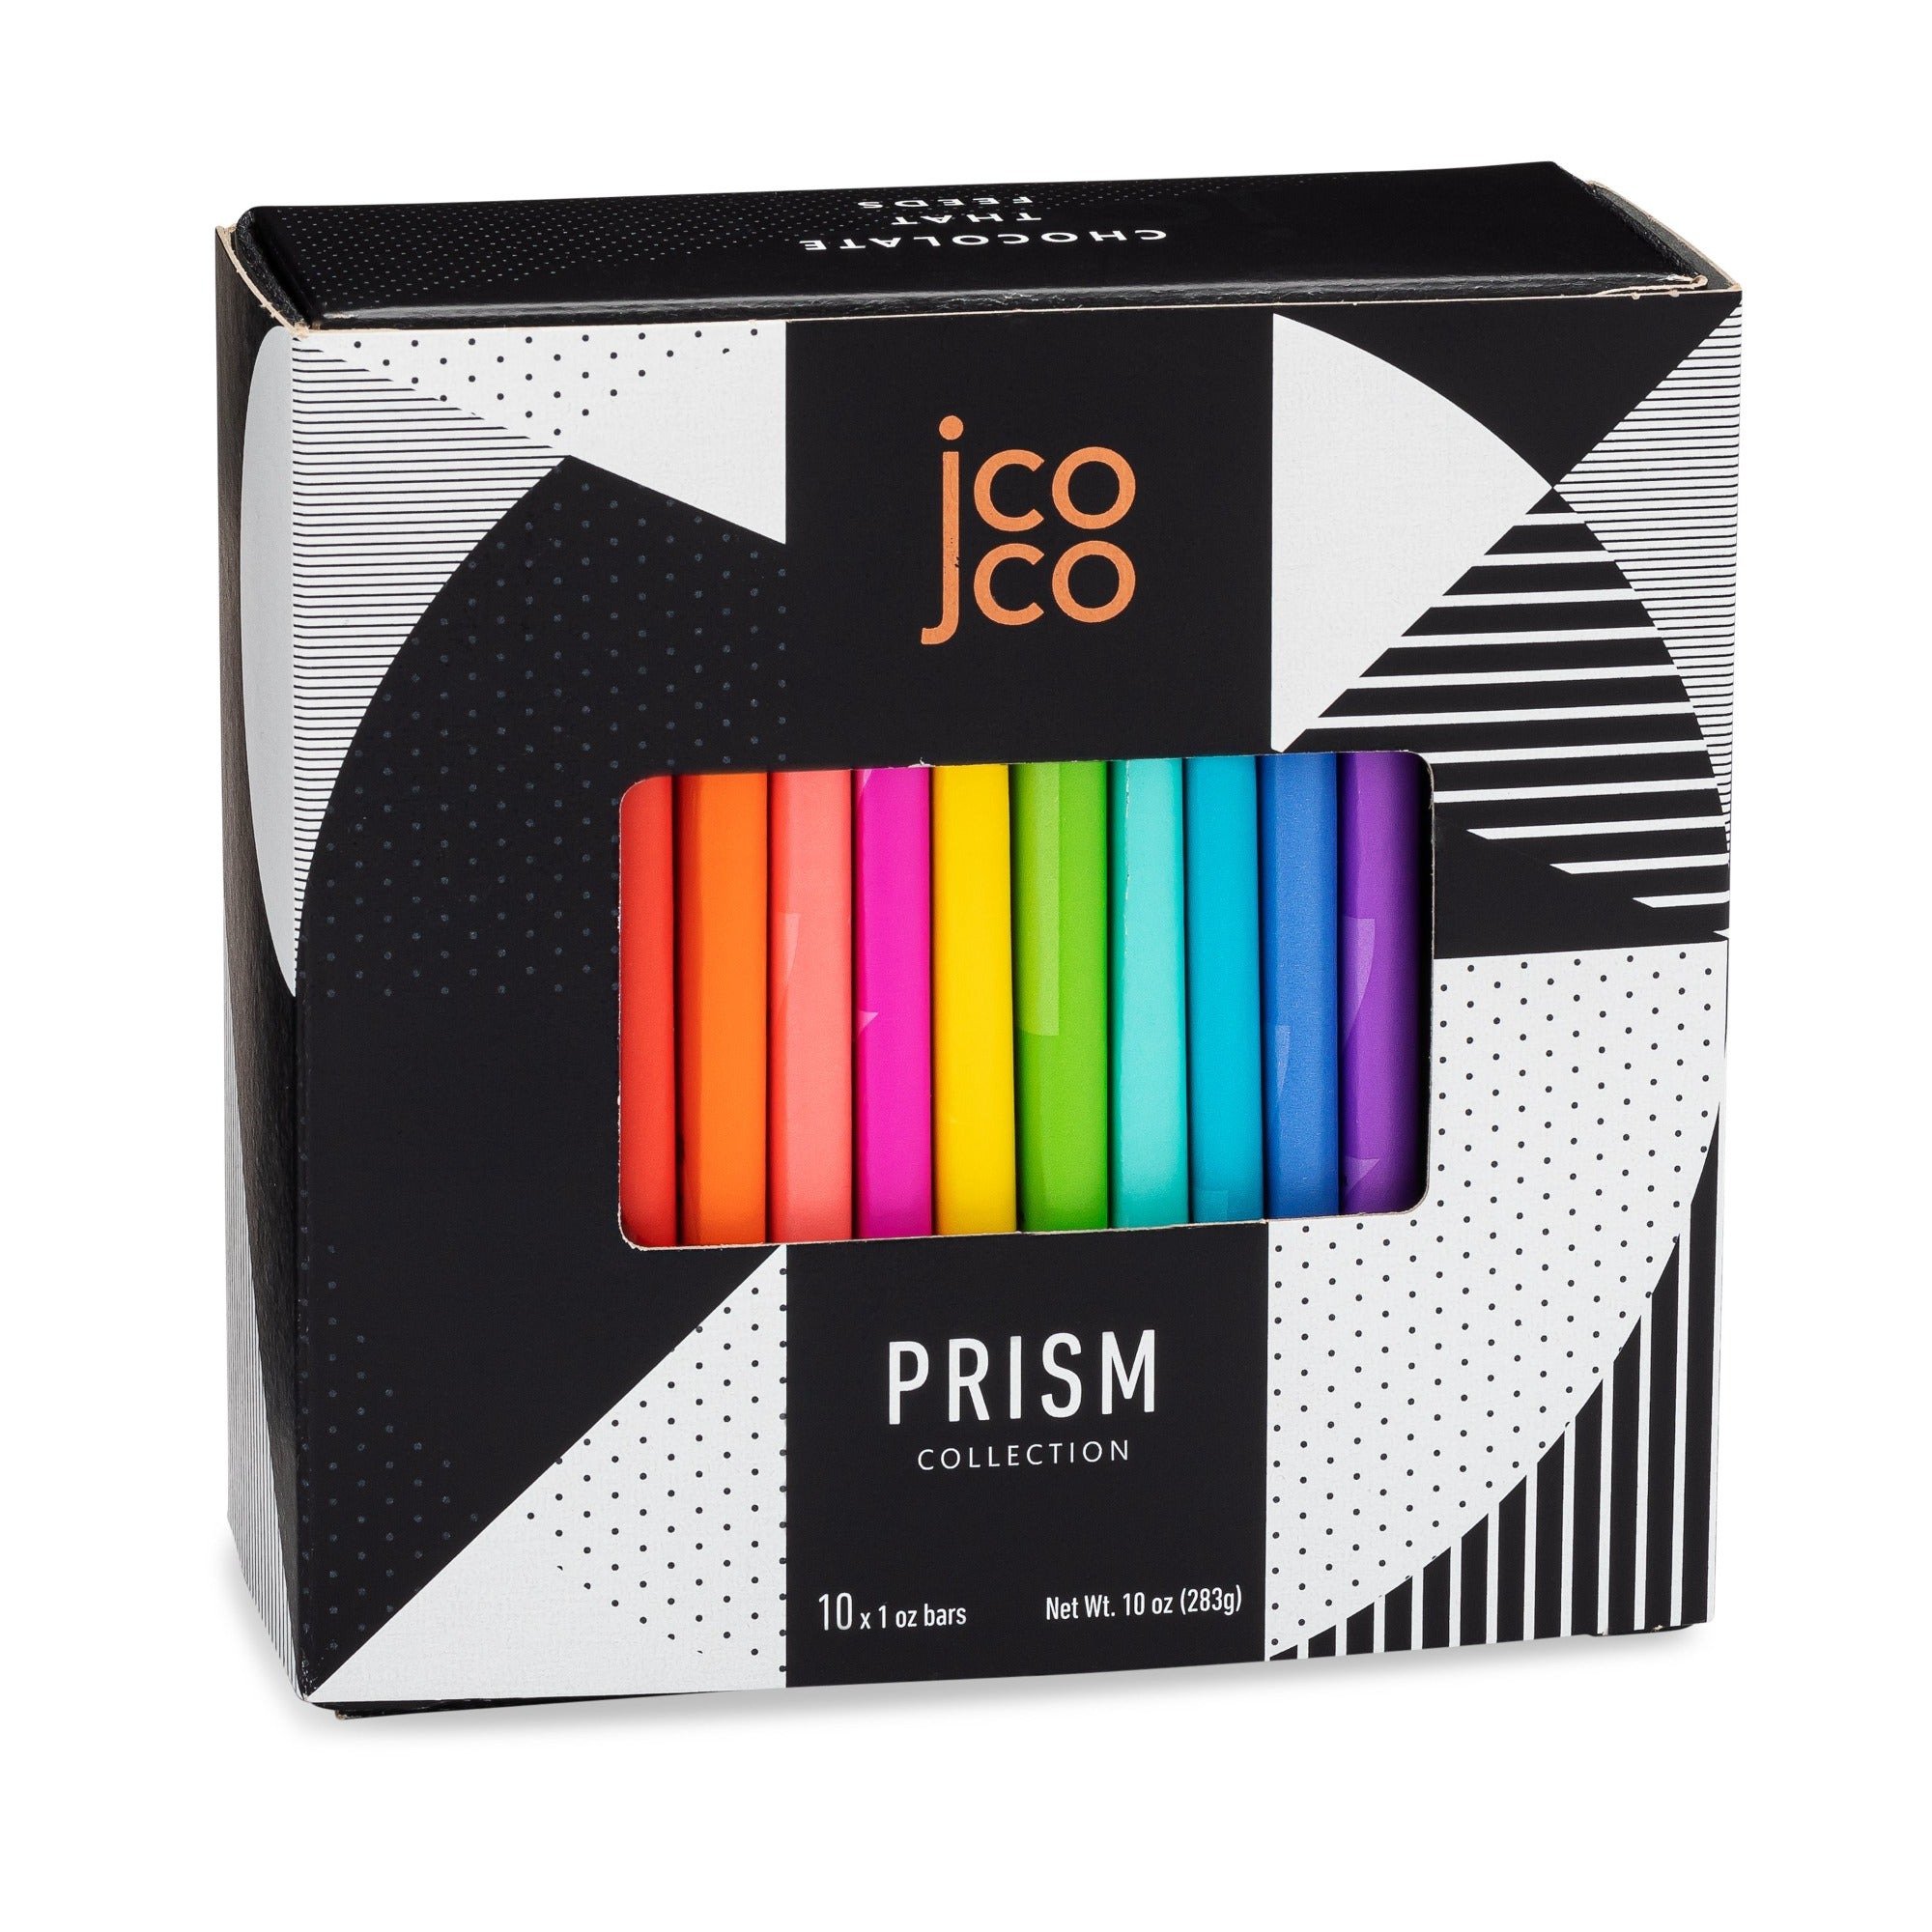 jcoco Prism chocolate bar Gift Box featuring all 10 jcoco flavors 